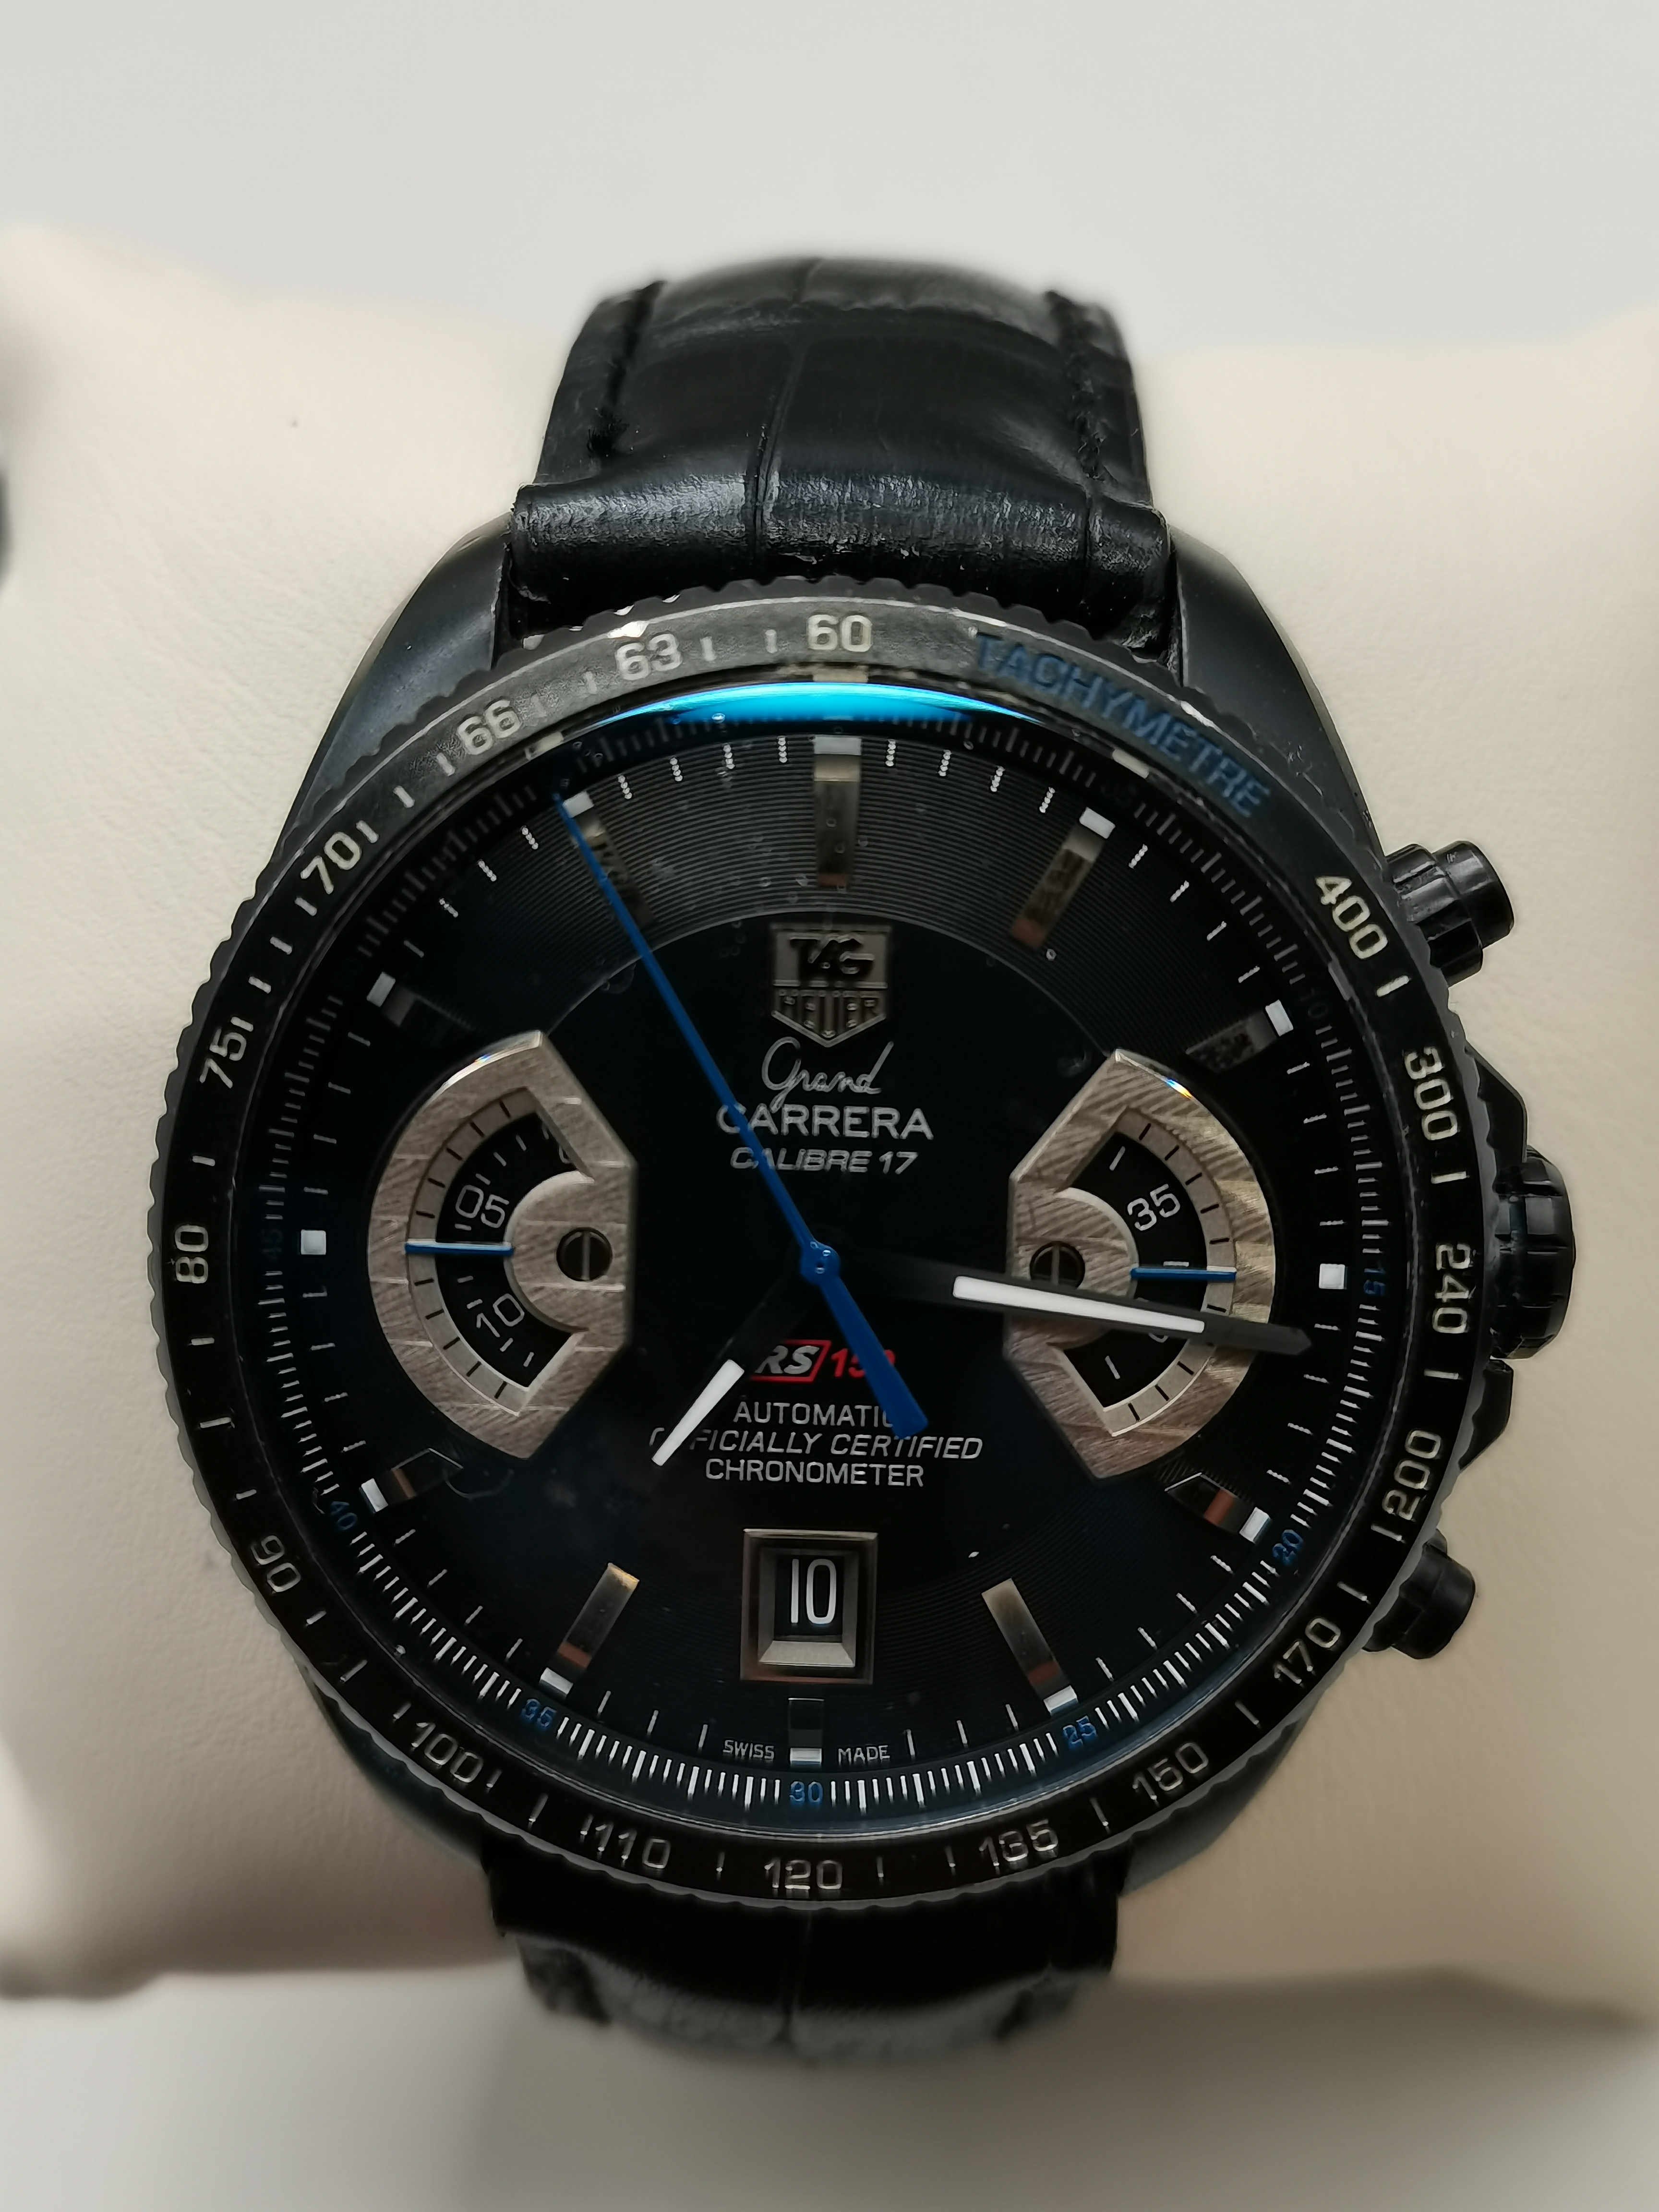 TAG Heuer Grand Carrera Calibre 17 Automatic wrist watch. - Image 5 of 6